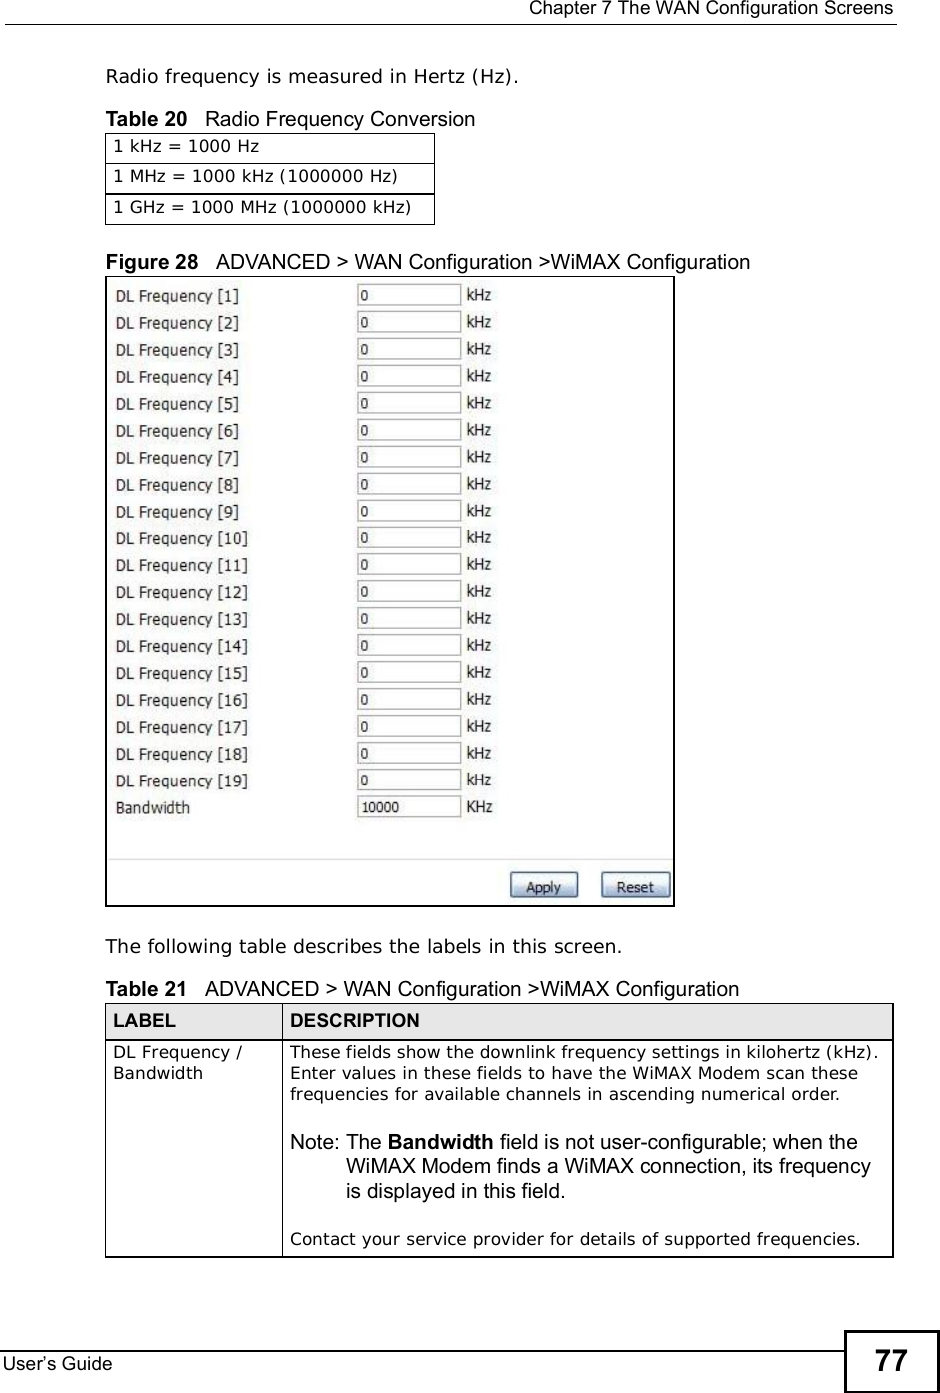  Chapter 7The WAN Configuration ScreensUser s Guide 77Radio frequency is measured in Hertz (Hz). Figure 28   ADVANCED &gt; WAN Configuration &gt;WiMAX Configuration   The following table describes the labels in this screen.Table 20   Radio Frequency Conversion1 kHz = 1000 Hz1 MHz = 1000 kHz (1000000 Hz)1 GHz = 1000 MHz (1000000 kHz)Table 21   ADVANCED &gt; WAN Configuration &gt;WiMAX ConfigurationLABEL DESCRIPTIONDL Frequency / Bandwidth These fields show the downlink frequency settings in kilohertz (kHz). Enter values in these fields to have the WiMAX Modem scan these frequencies for available channels in ascending numerical order.Note: The Bandwidth field is not user-configurable; when the WiMAX Modem finds a WiMAX connection, its frequency is displayed in this field.Contact your service provider for details of supported frequencies.